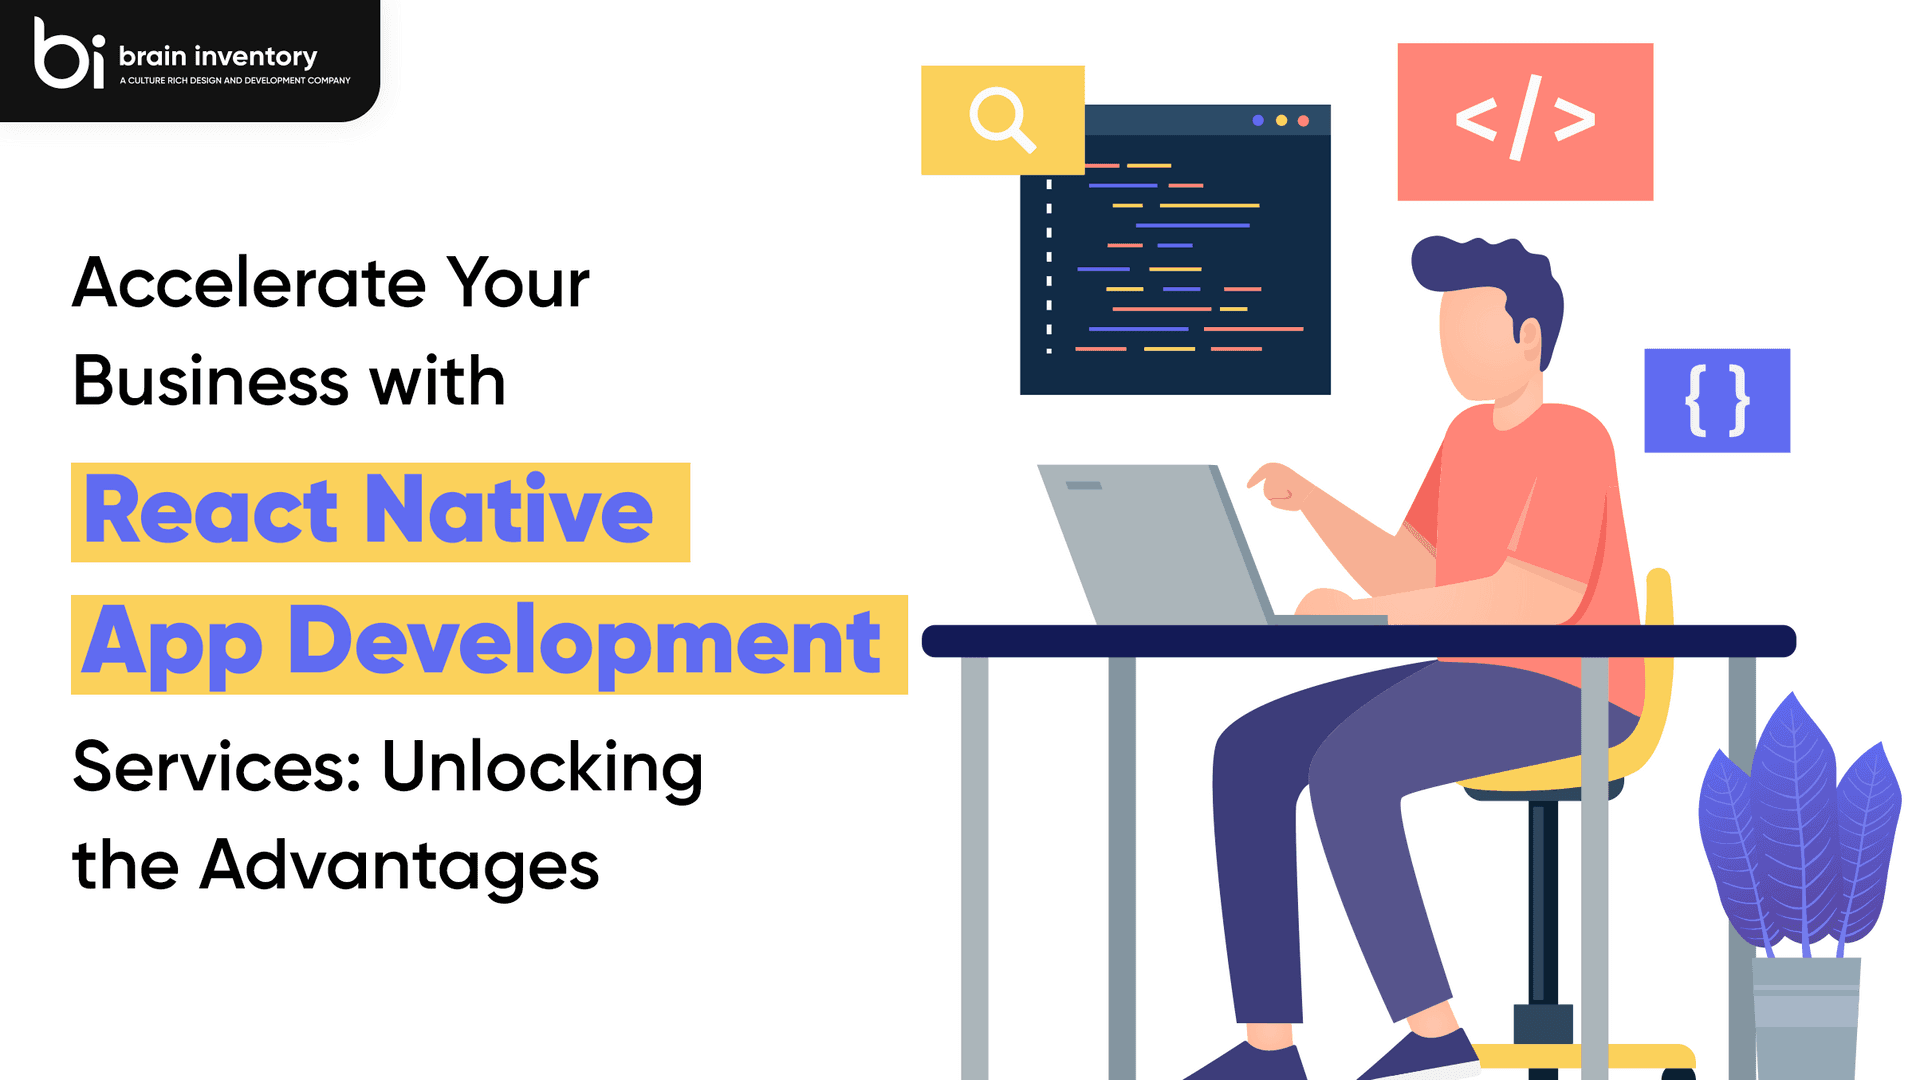 Accelerate Your Business with React Native App Development Services: Unlocking the Advantages